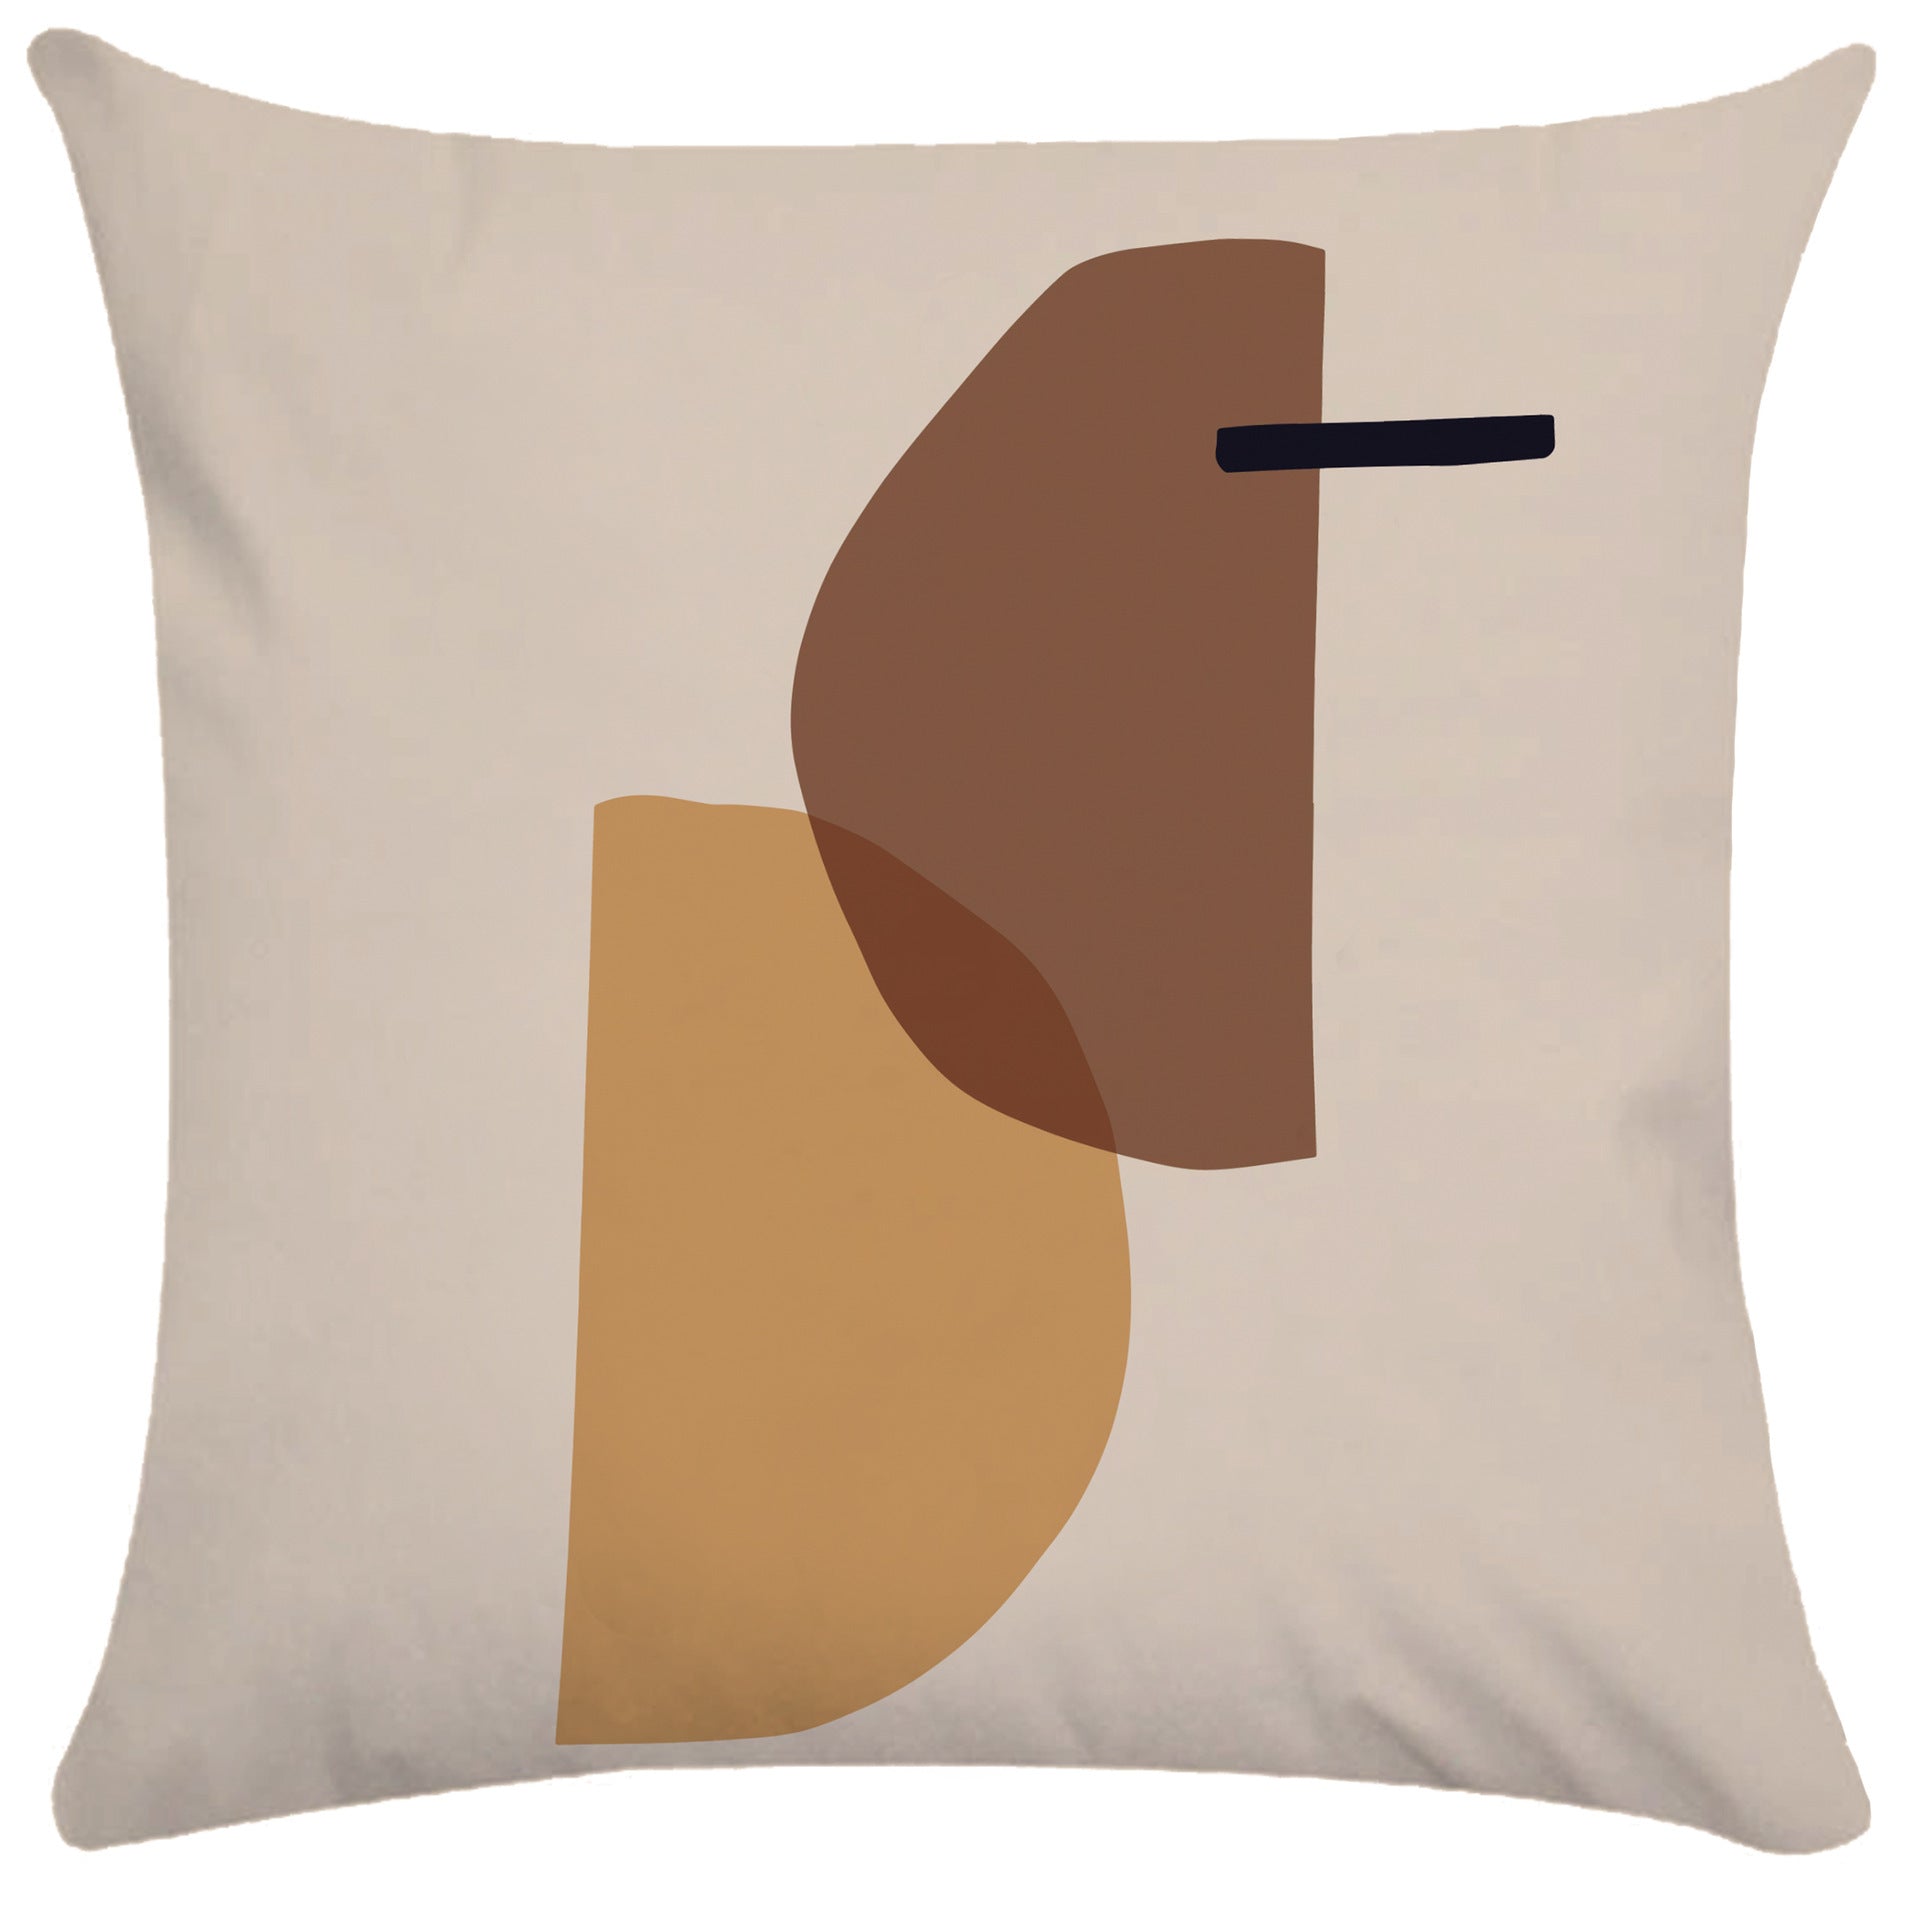 Pillowcase With A Geometric Abstract Design